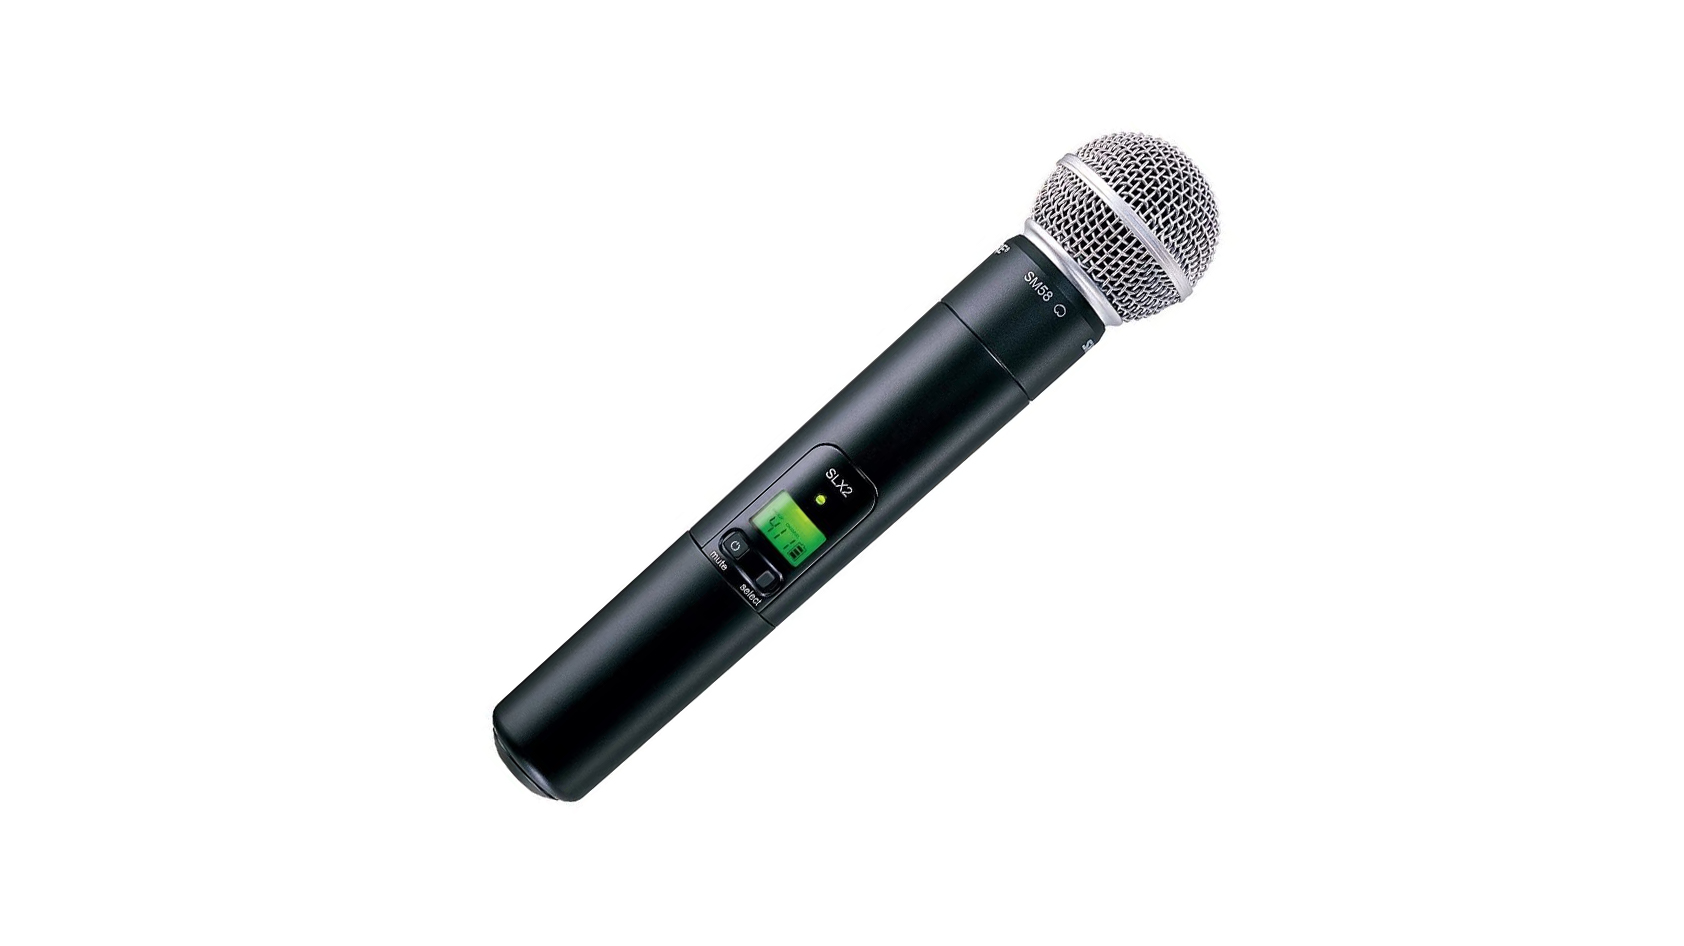 Shure SLX124/85/SM58 wireless microphone pack product image of just the SM58 handheld mic.